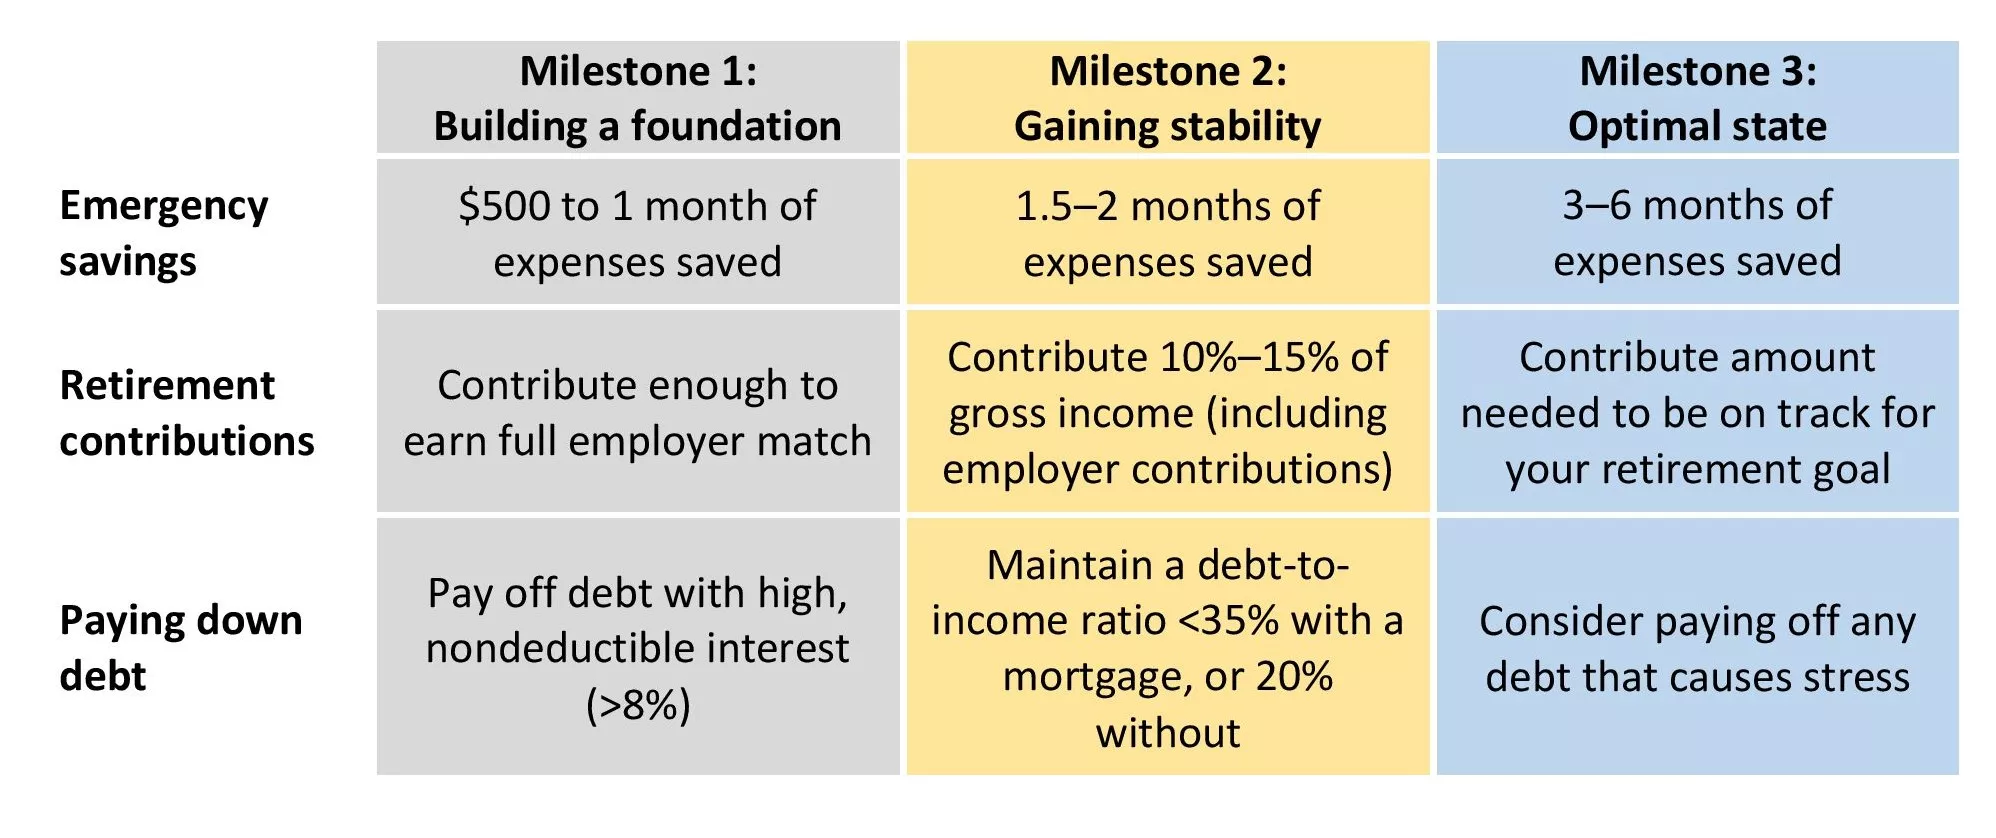 Chart showing key mile stones which impact for retirement